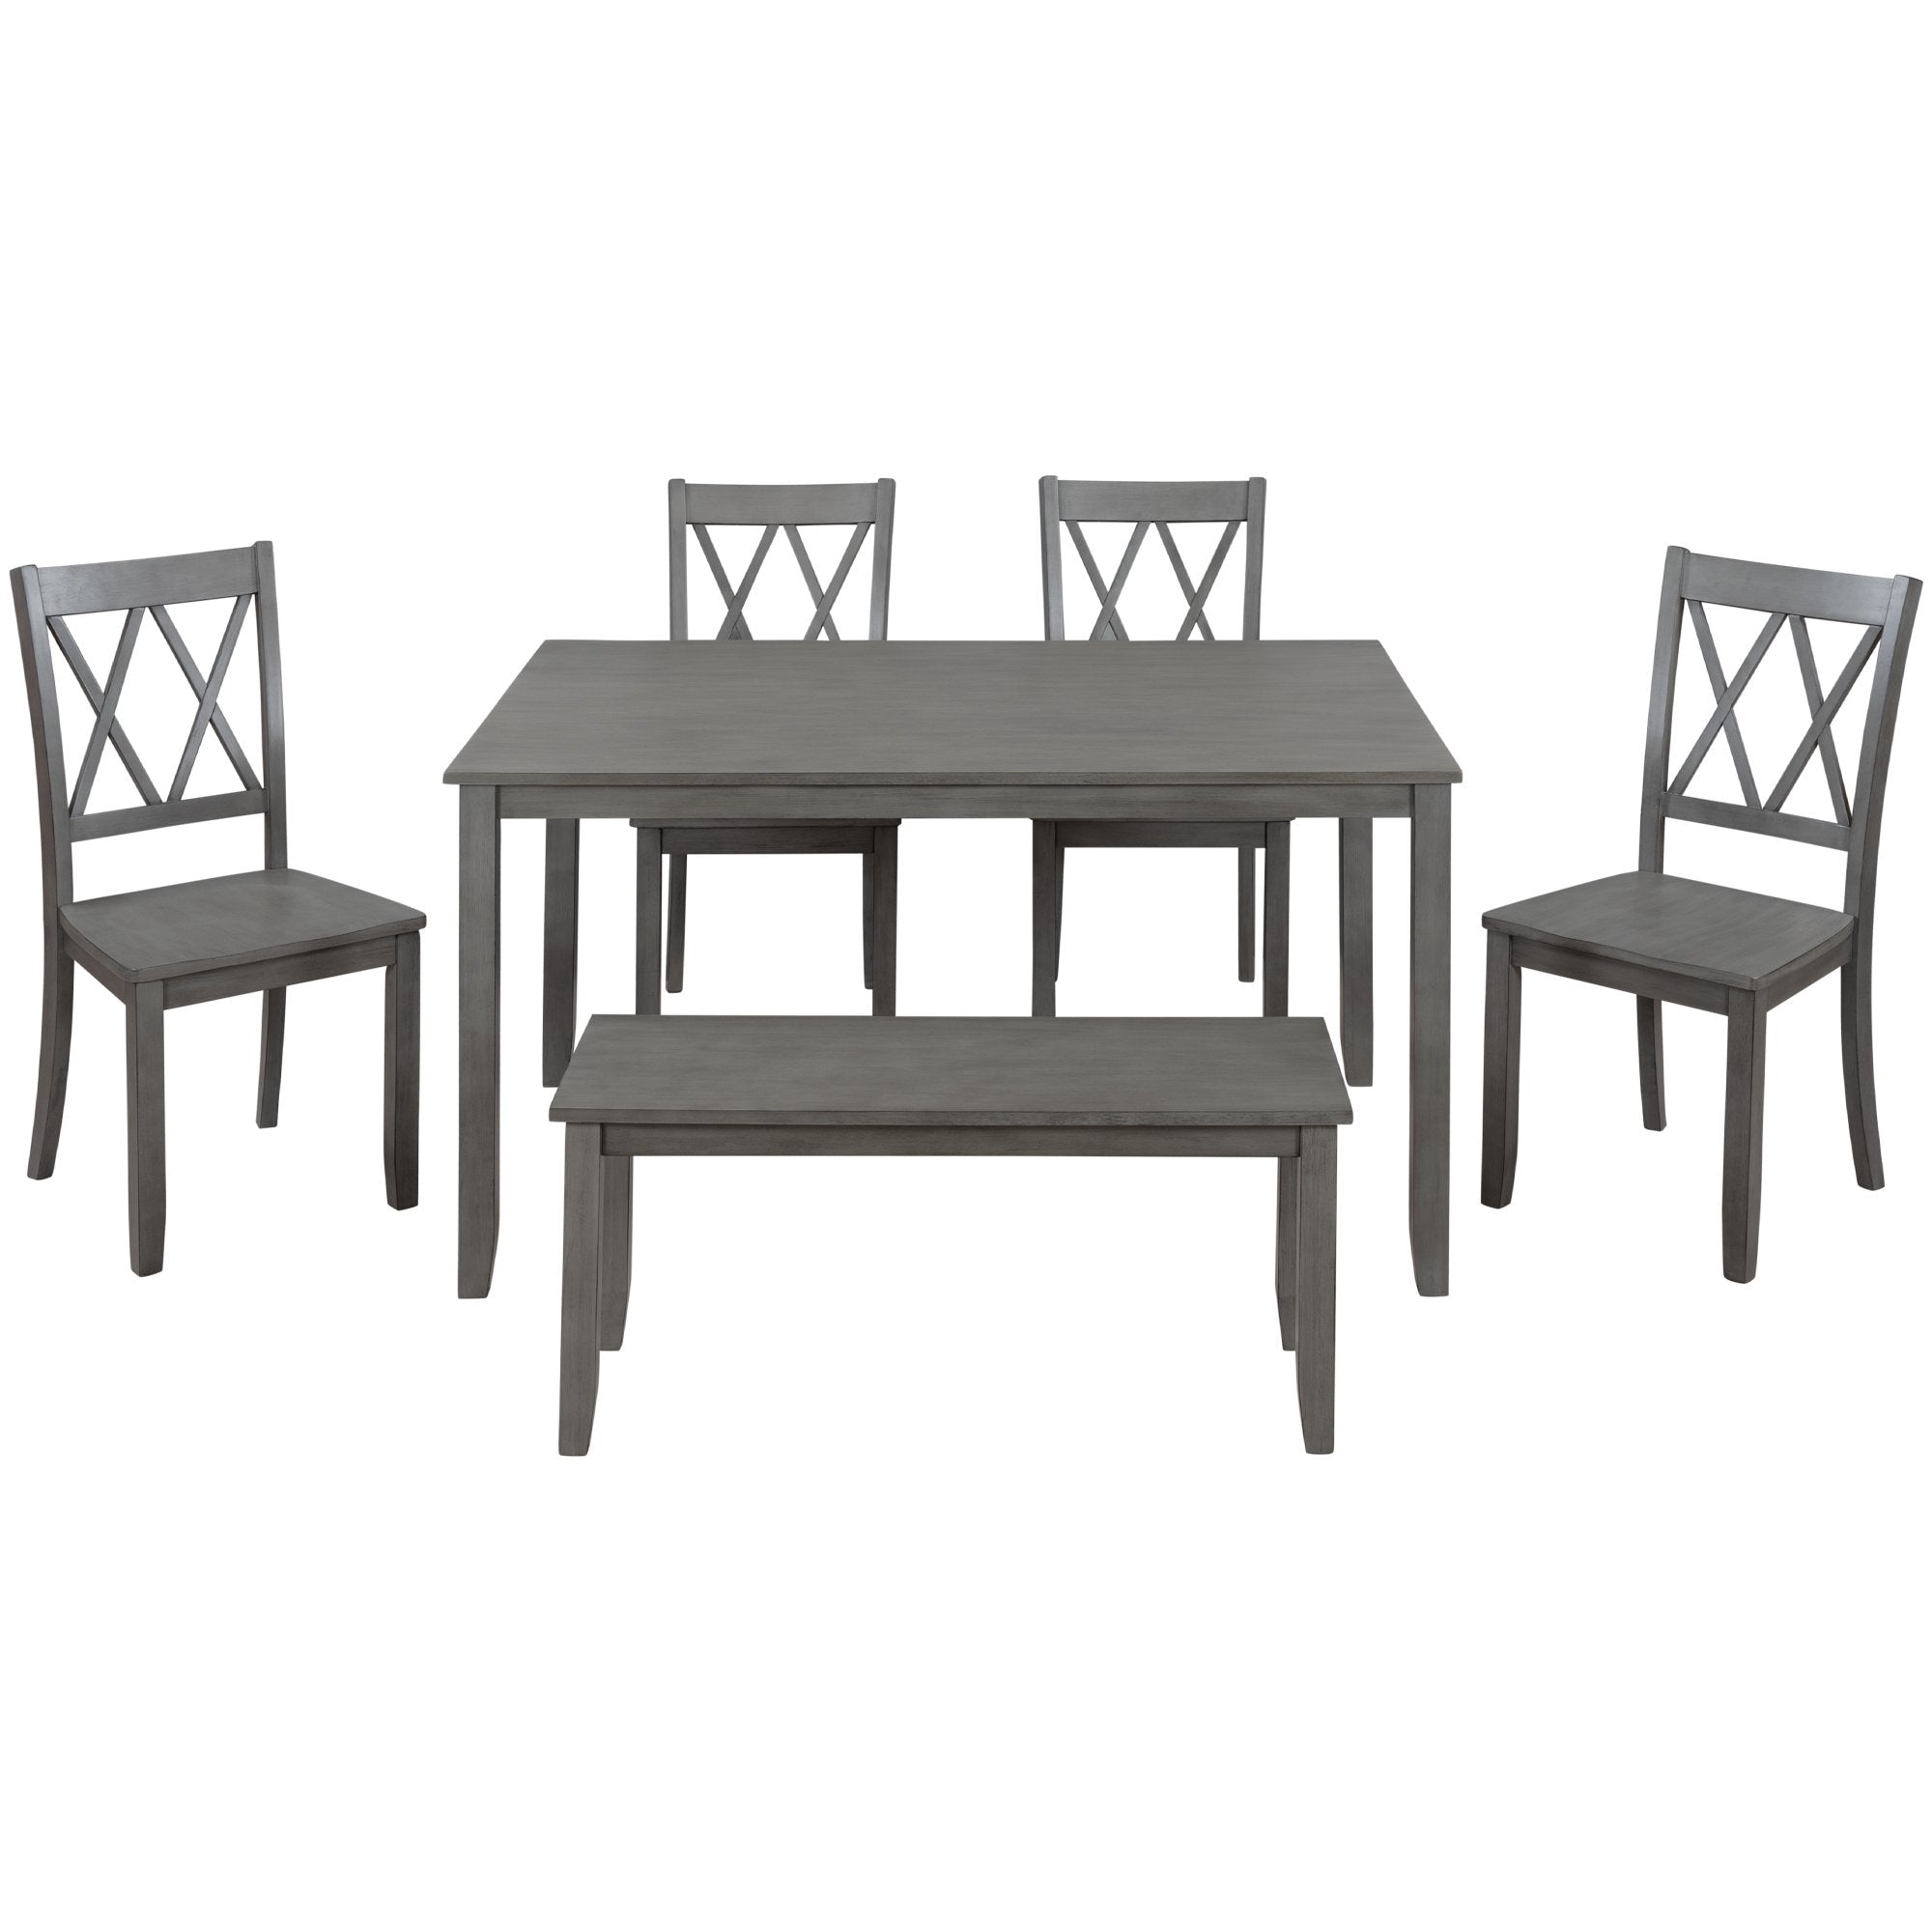 6-piece Wooden Kitchen Table set, Farmhouse Rustic Dining Table set with Cross Back 4 Chairs and Bench,Antique Graywash-Boyel Living